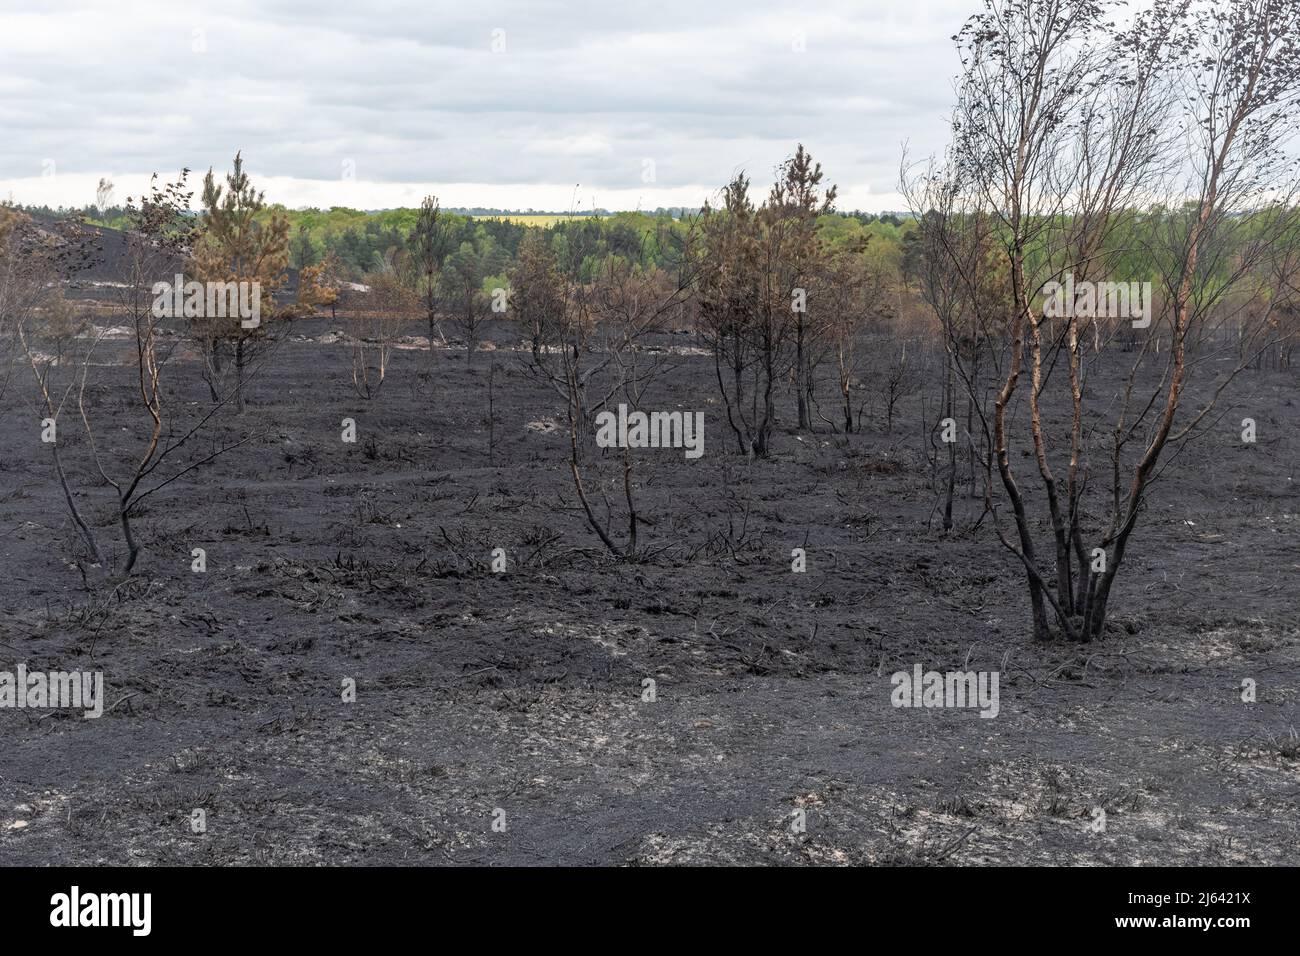 Ash Ranges, Pirbright, Surrey, days after a large heathland fire burnt 300 hectares of MOD-owned land, an important wildlife habitat, UK April 27 2022 Stock Photo